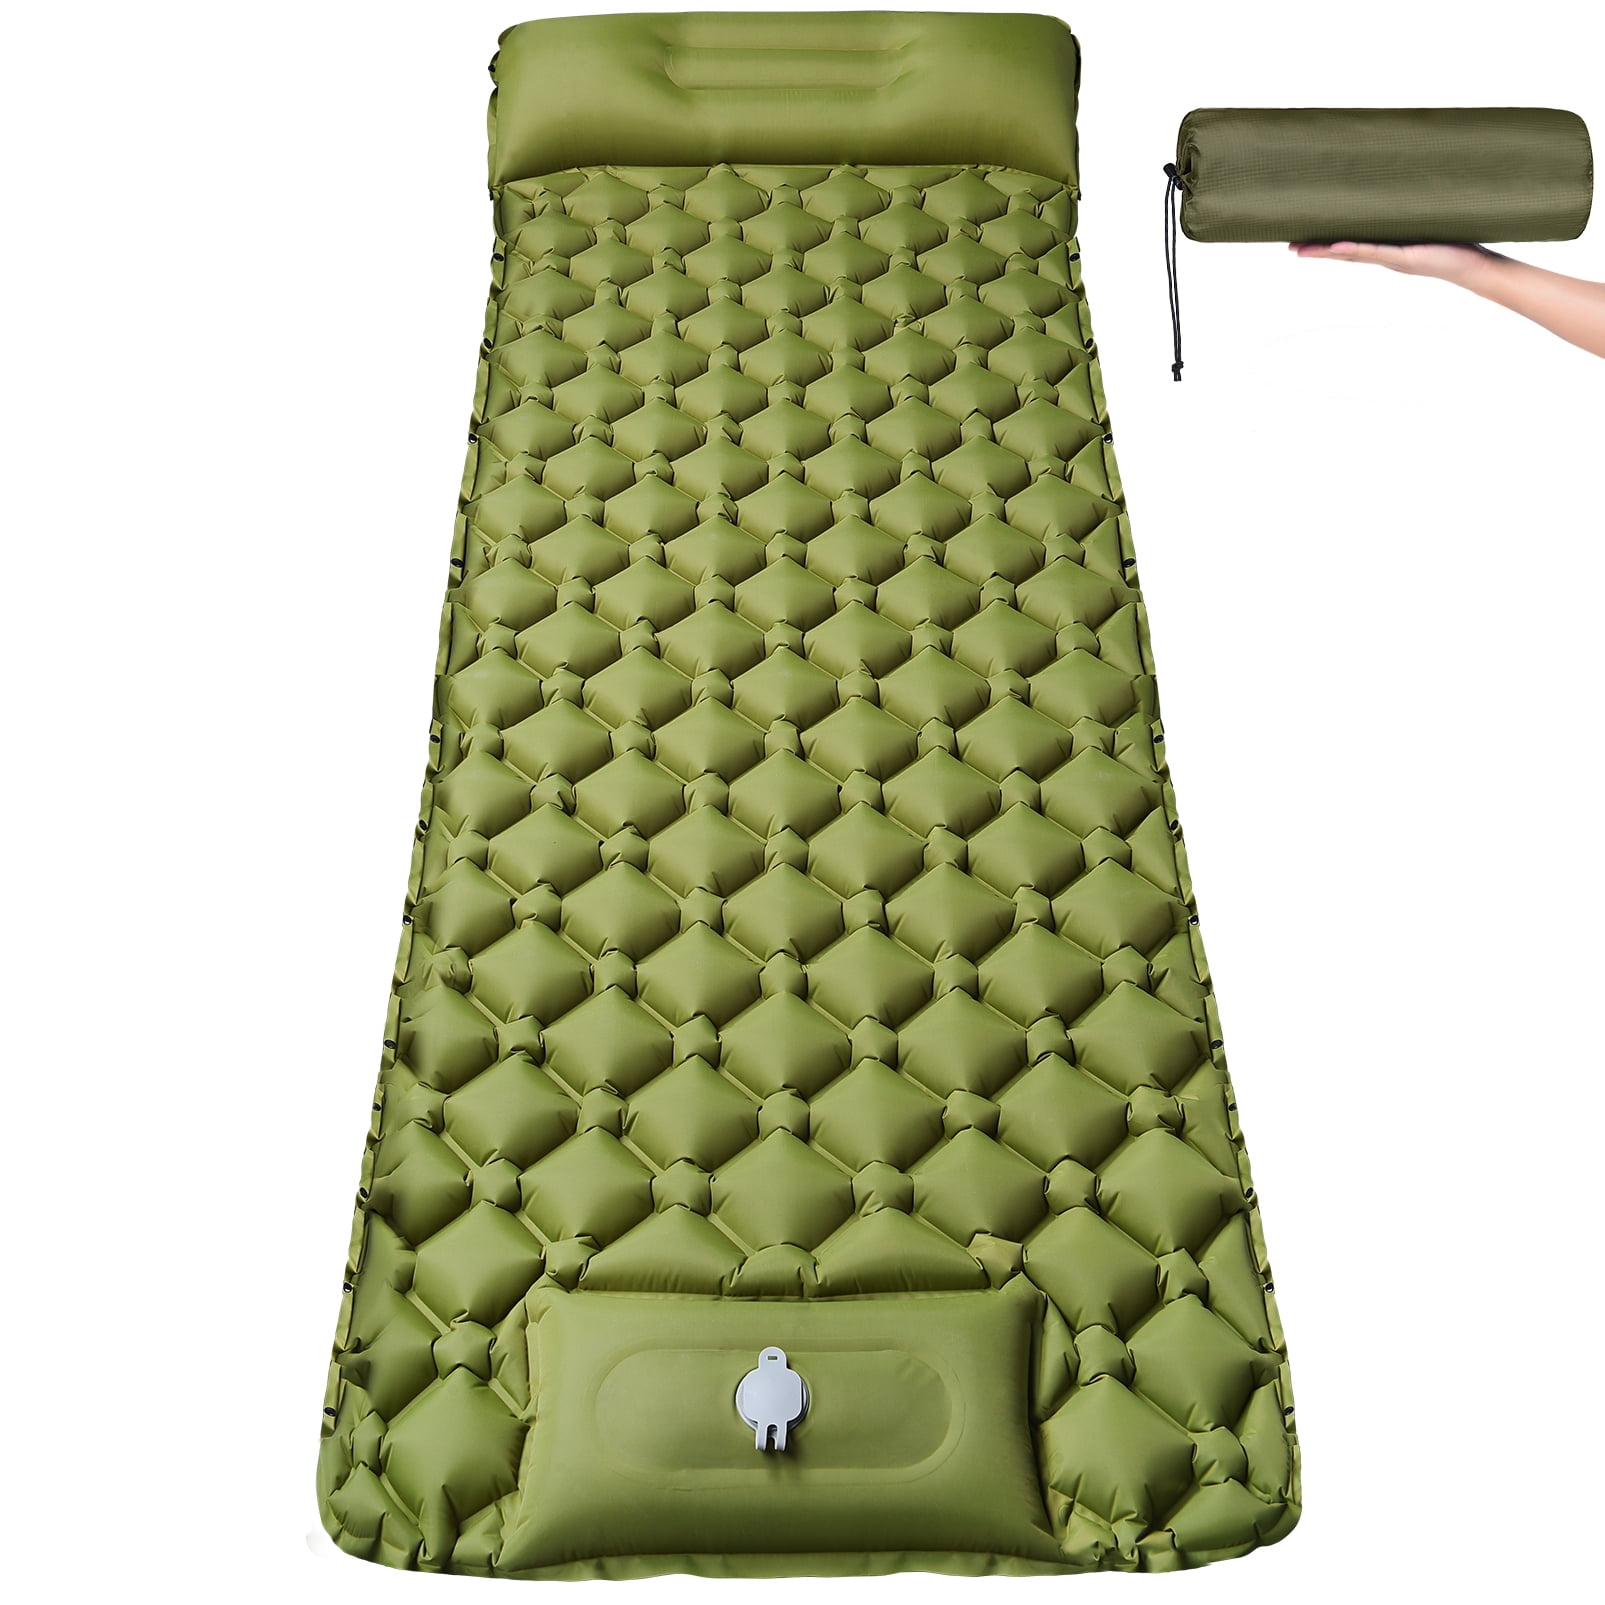 Outdoor Camping Sleeping Pad Inflatable Mat Lightweight for Hiking Backpacking 